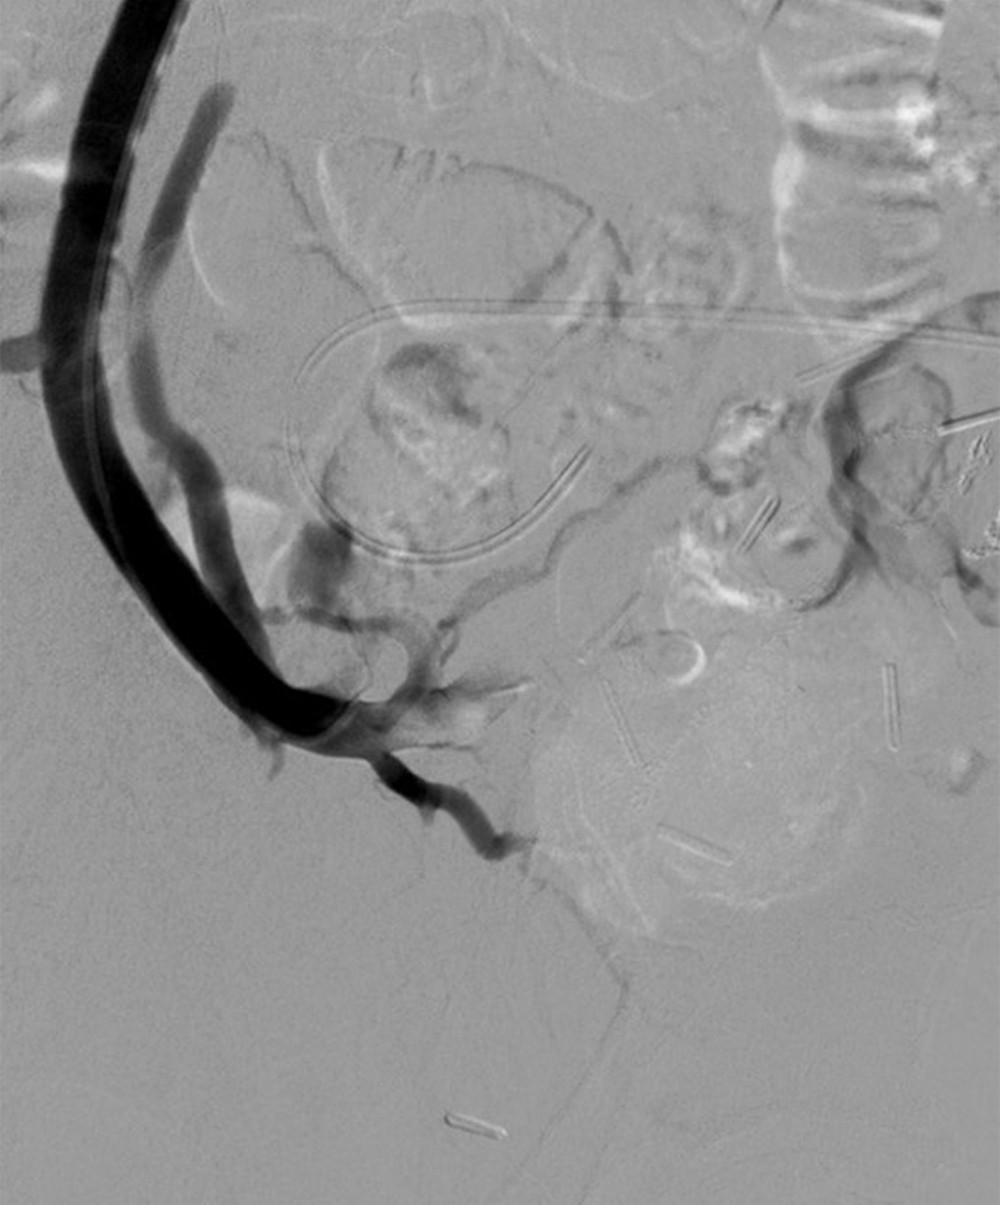 Superior mesenteric venography performed after selective embolization with 3% sodium tetradecyl sulphate shows complete obliteration of porto-systemic shunting and preserved patency of the jejunal vein.